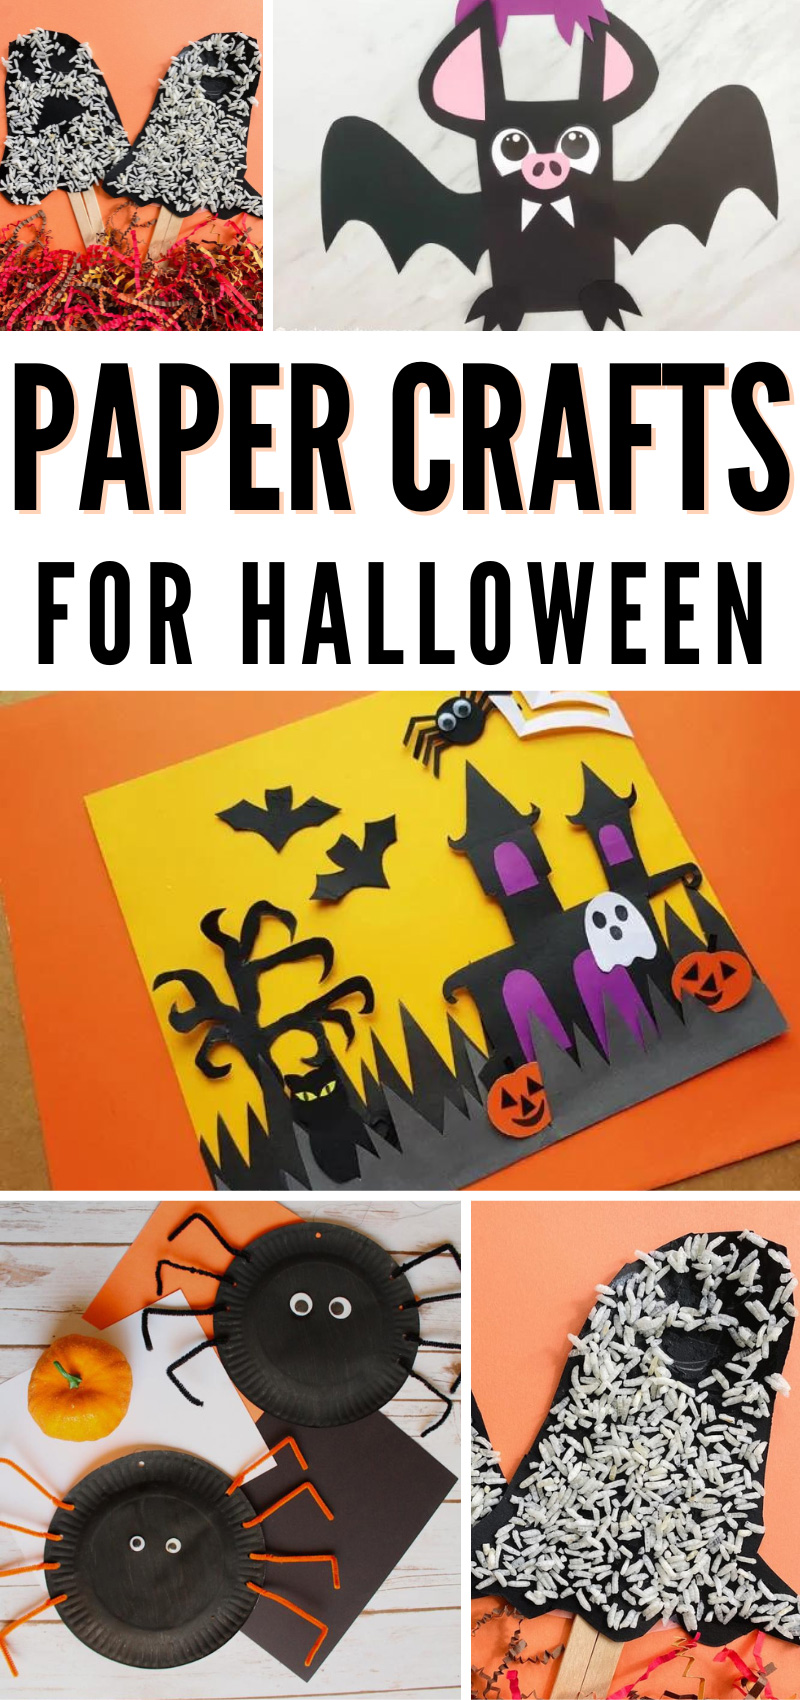 22 Paper Crafts for Halloween (by Age) * Moms and Crafters